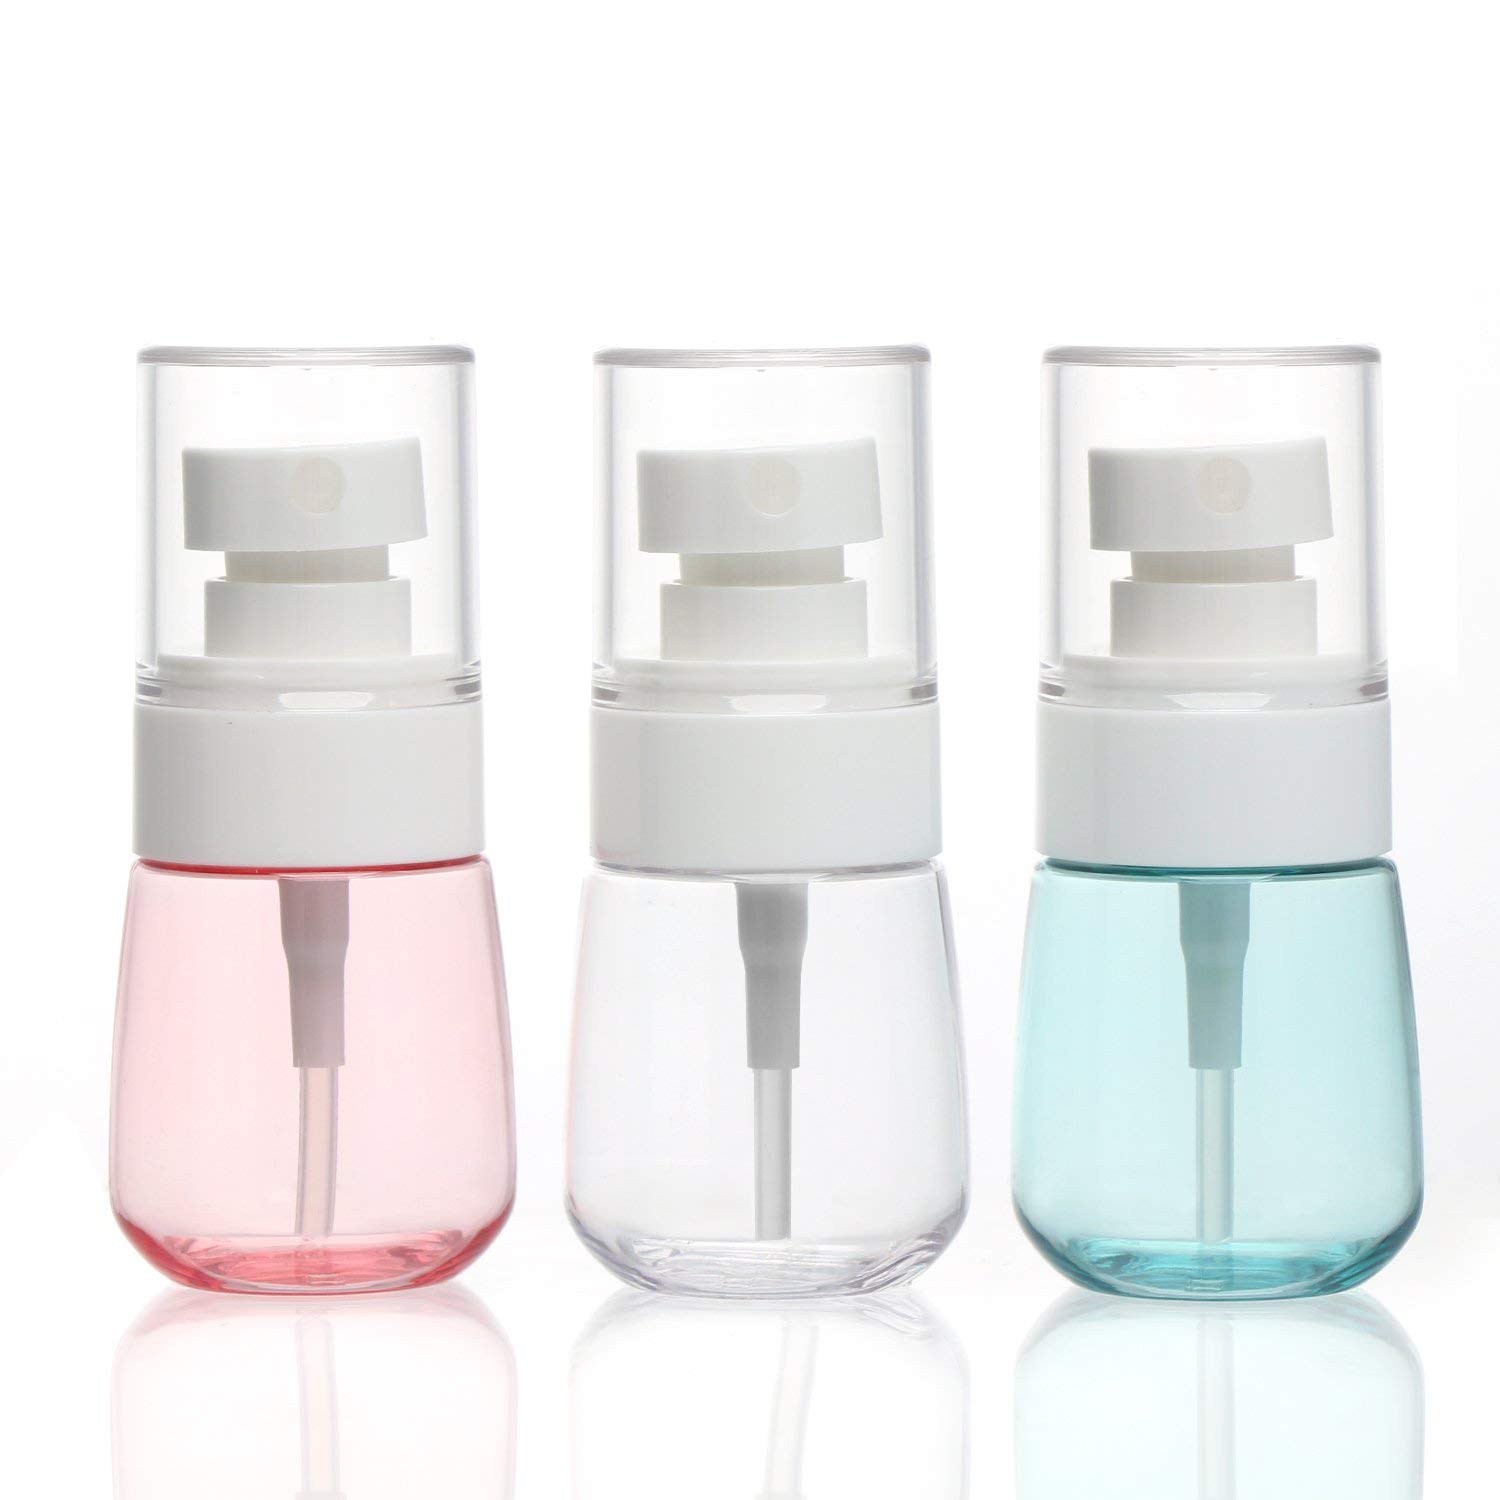 Segbeauty 3pcs 30ml/1oz Airless Fine Mist Spray Bottle Travel Containers